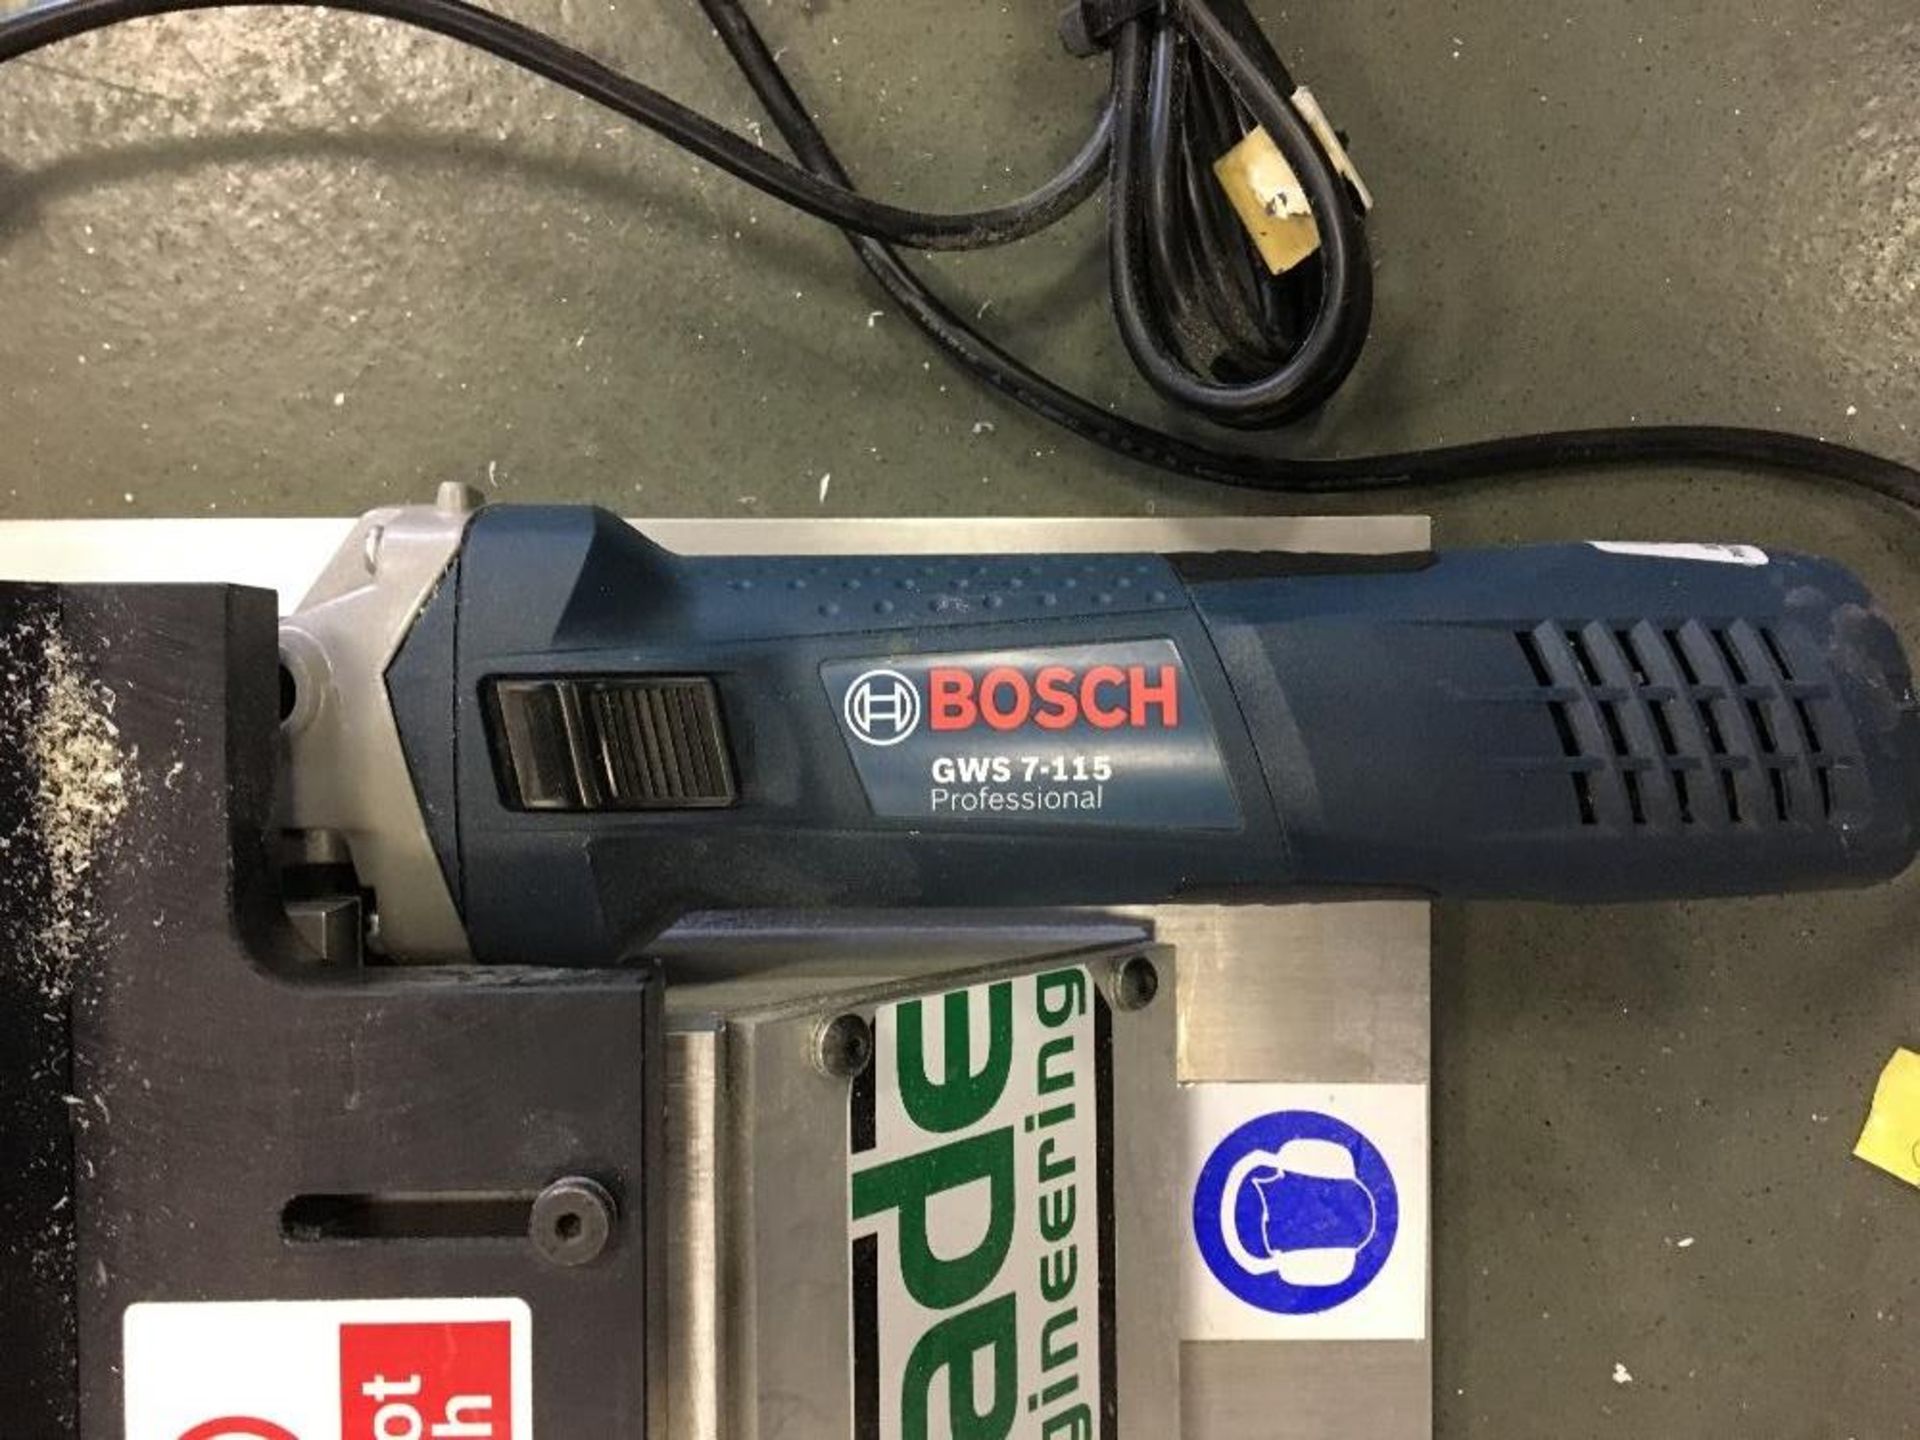 Jade Engineering wall mounted jig with Bosch GWS 7-115 Professional grinder - Image 3 of 3